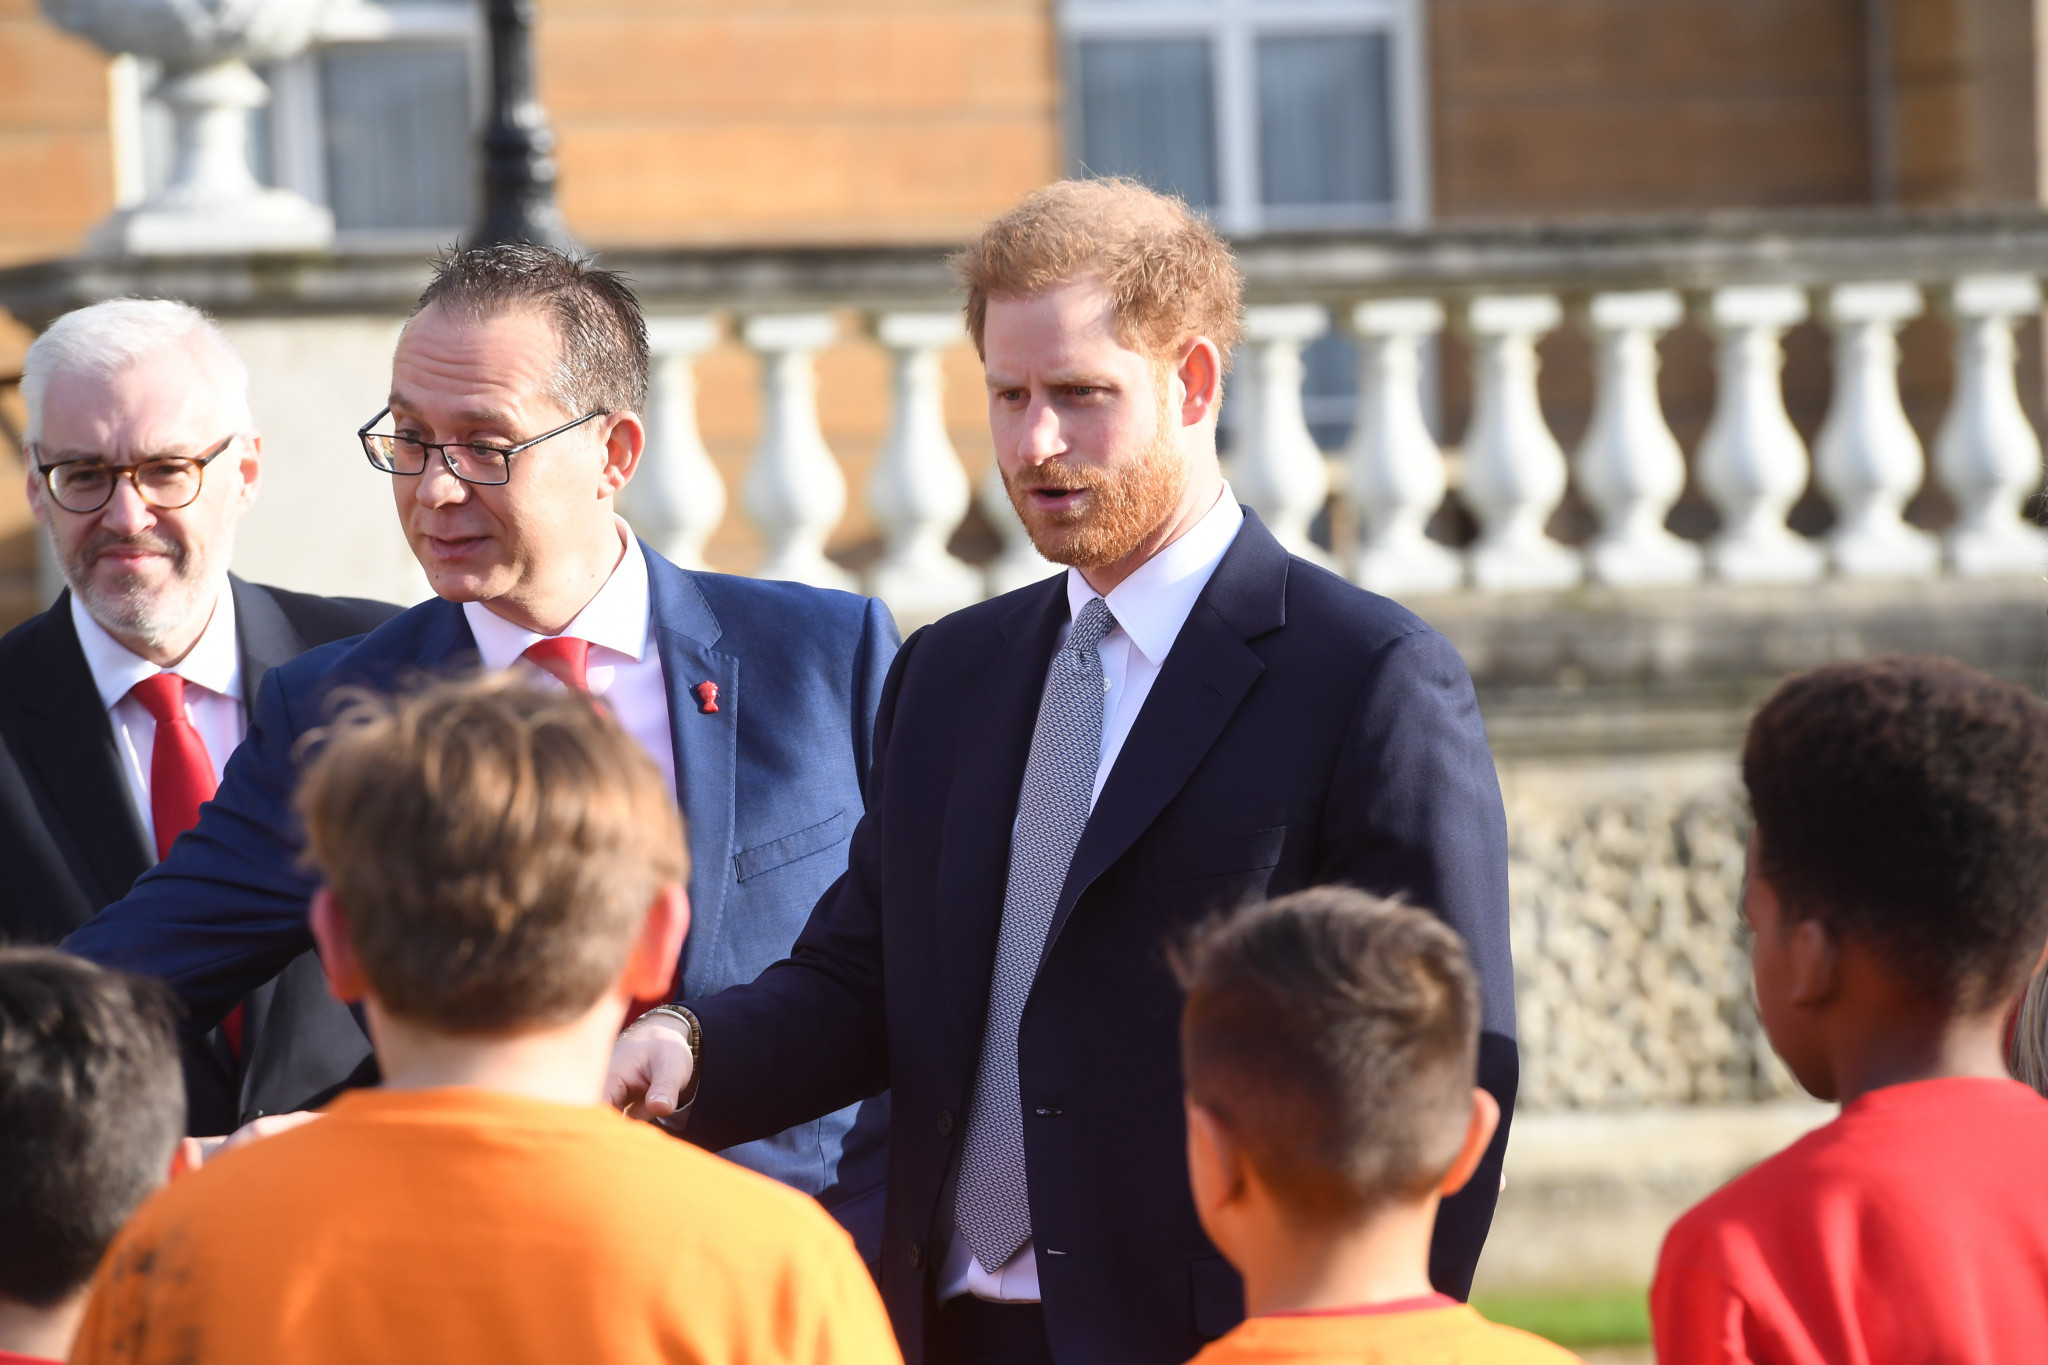 Prince Harry to remain patron of Rugby Football League despite stepping down from royal duties